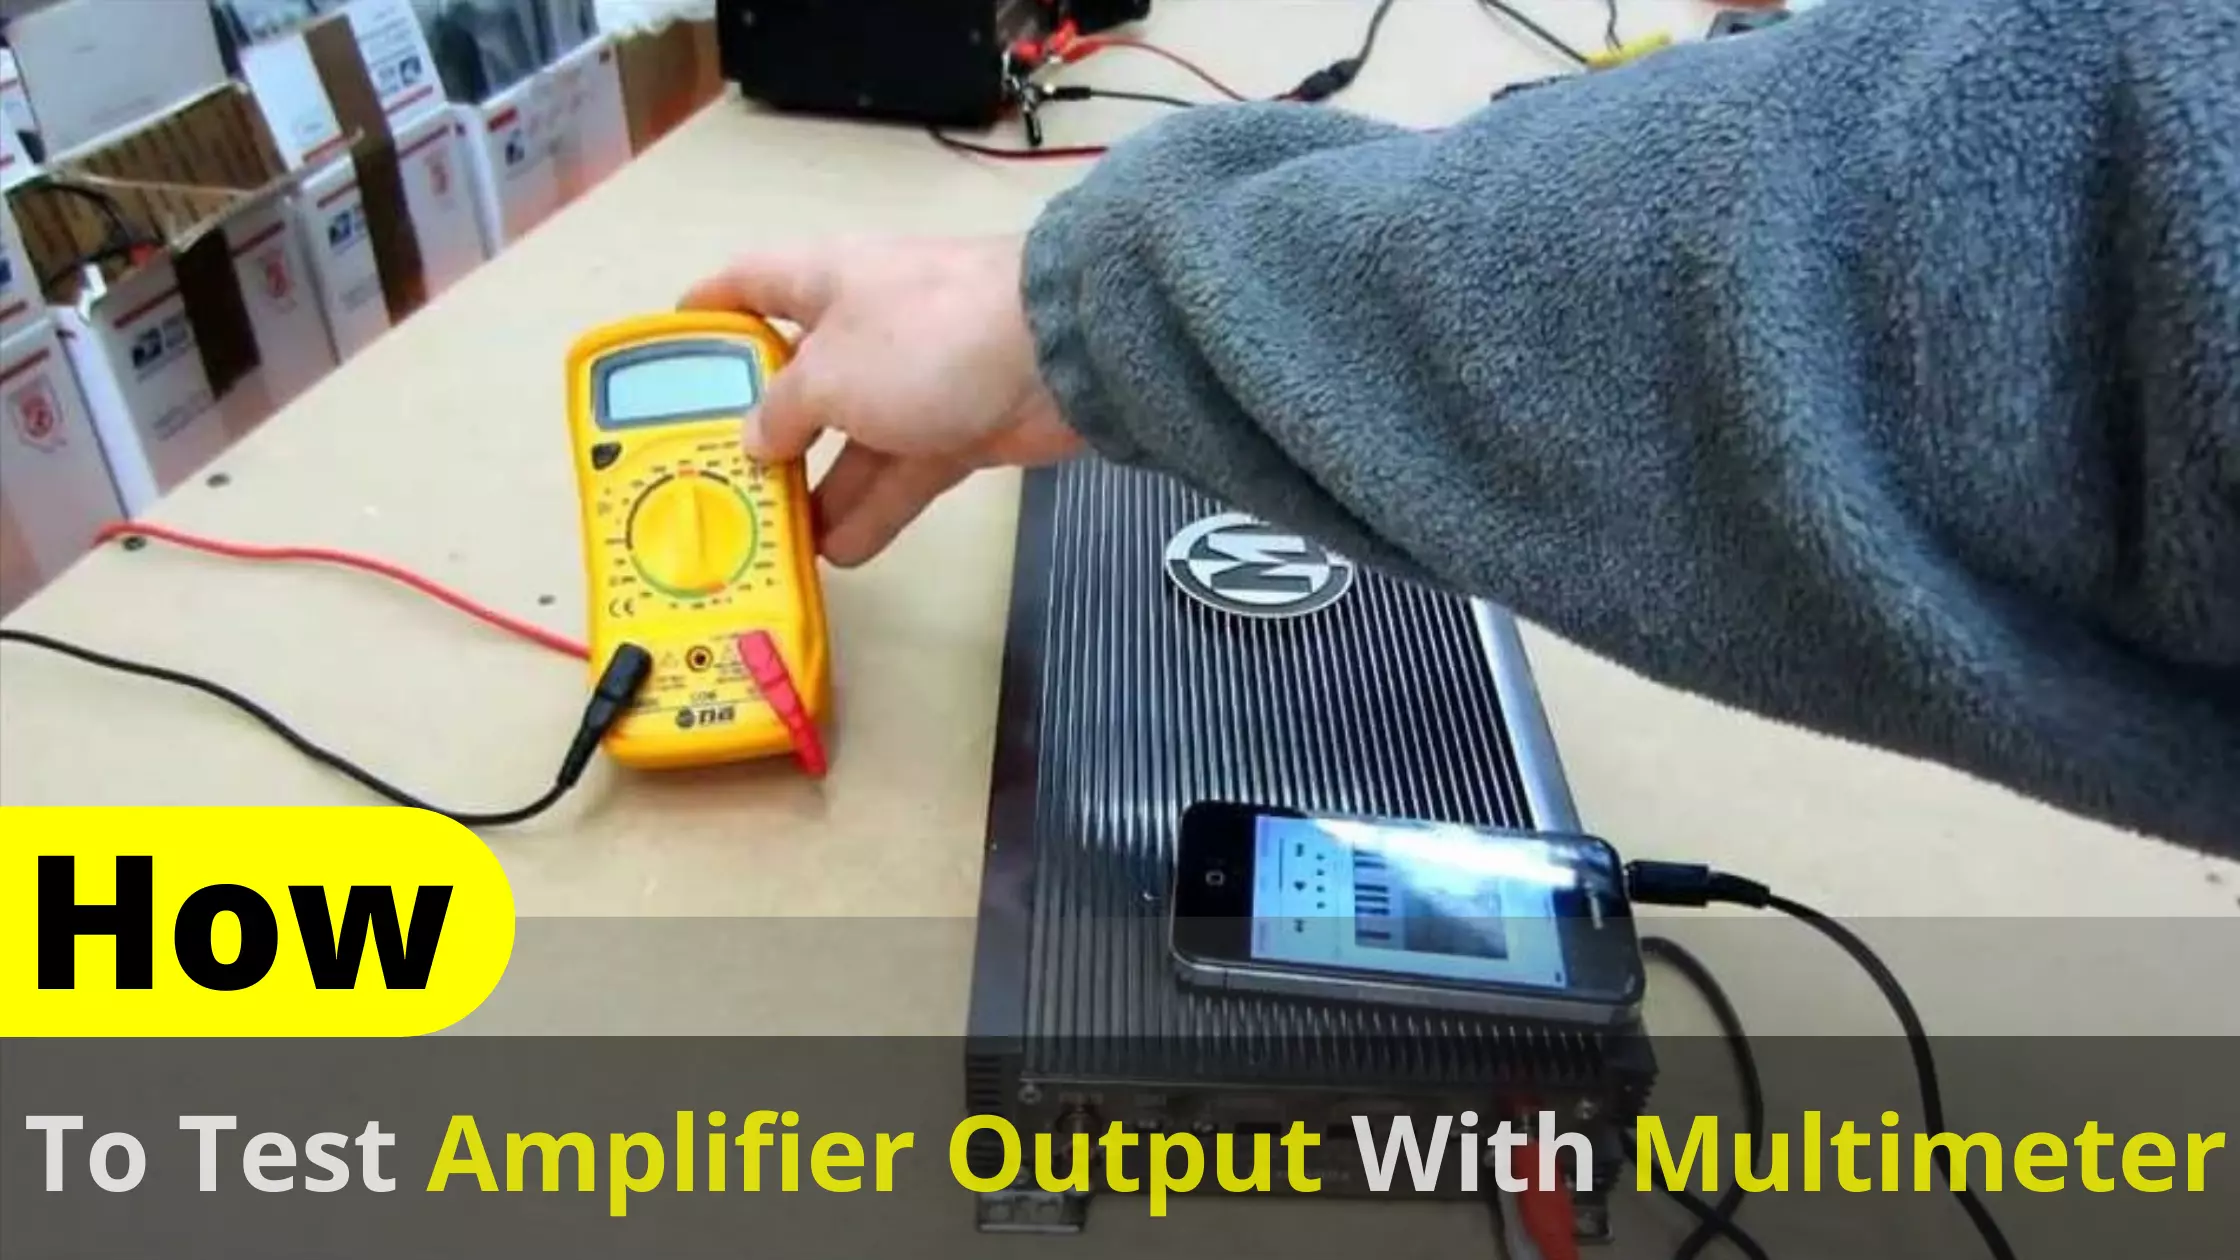 How To Test Amplifier Output With Multimeter?